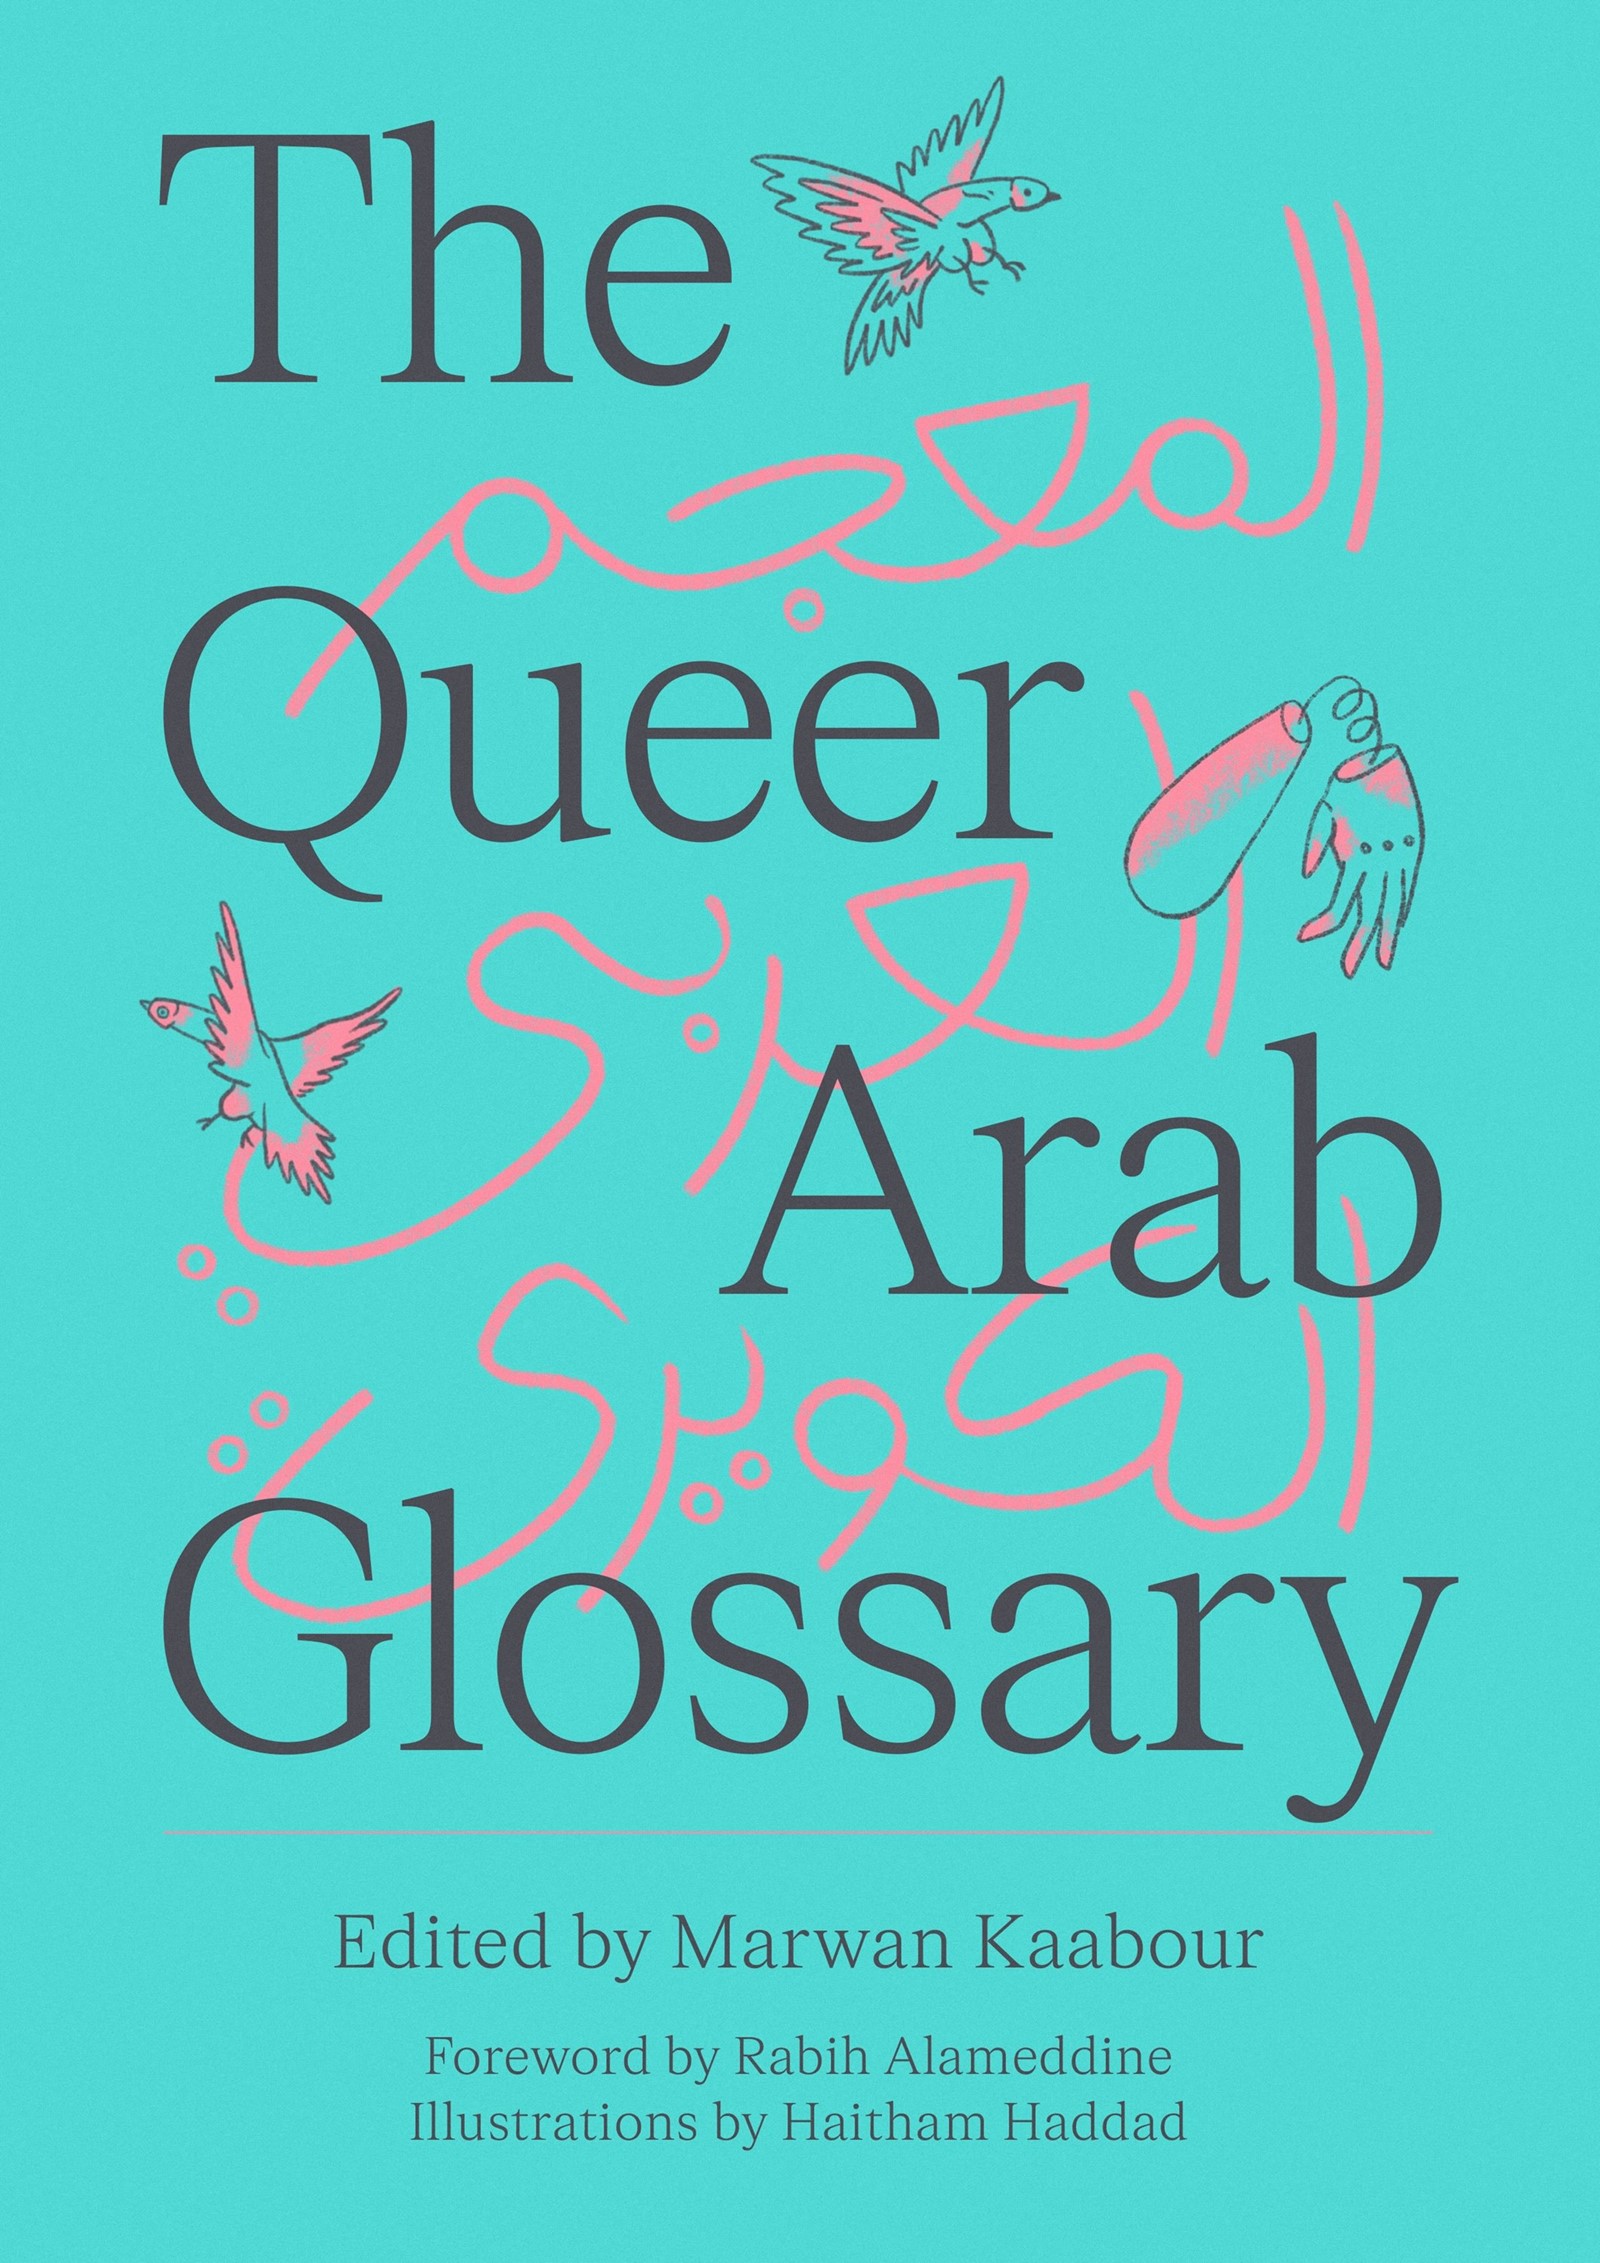 The Queer Arab Glossary by Marwan Kaabour